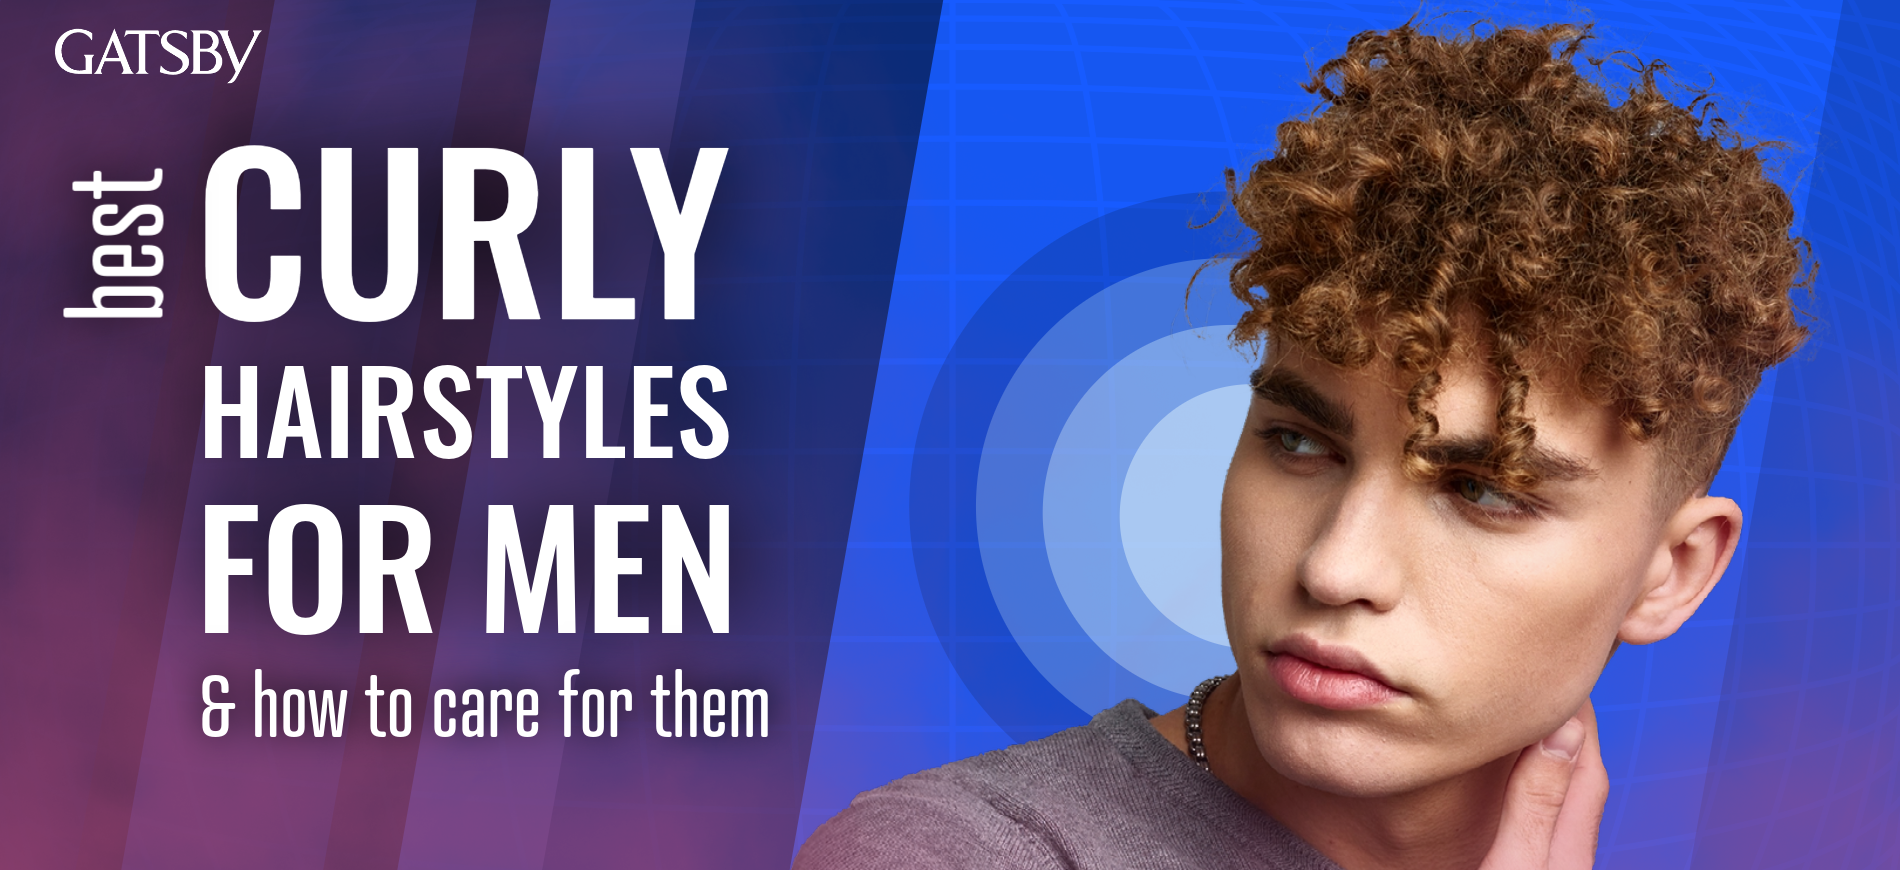 curly-hairstyles-for-men-and-how-to-care-for-them